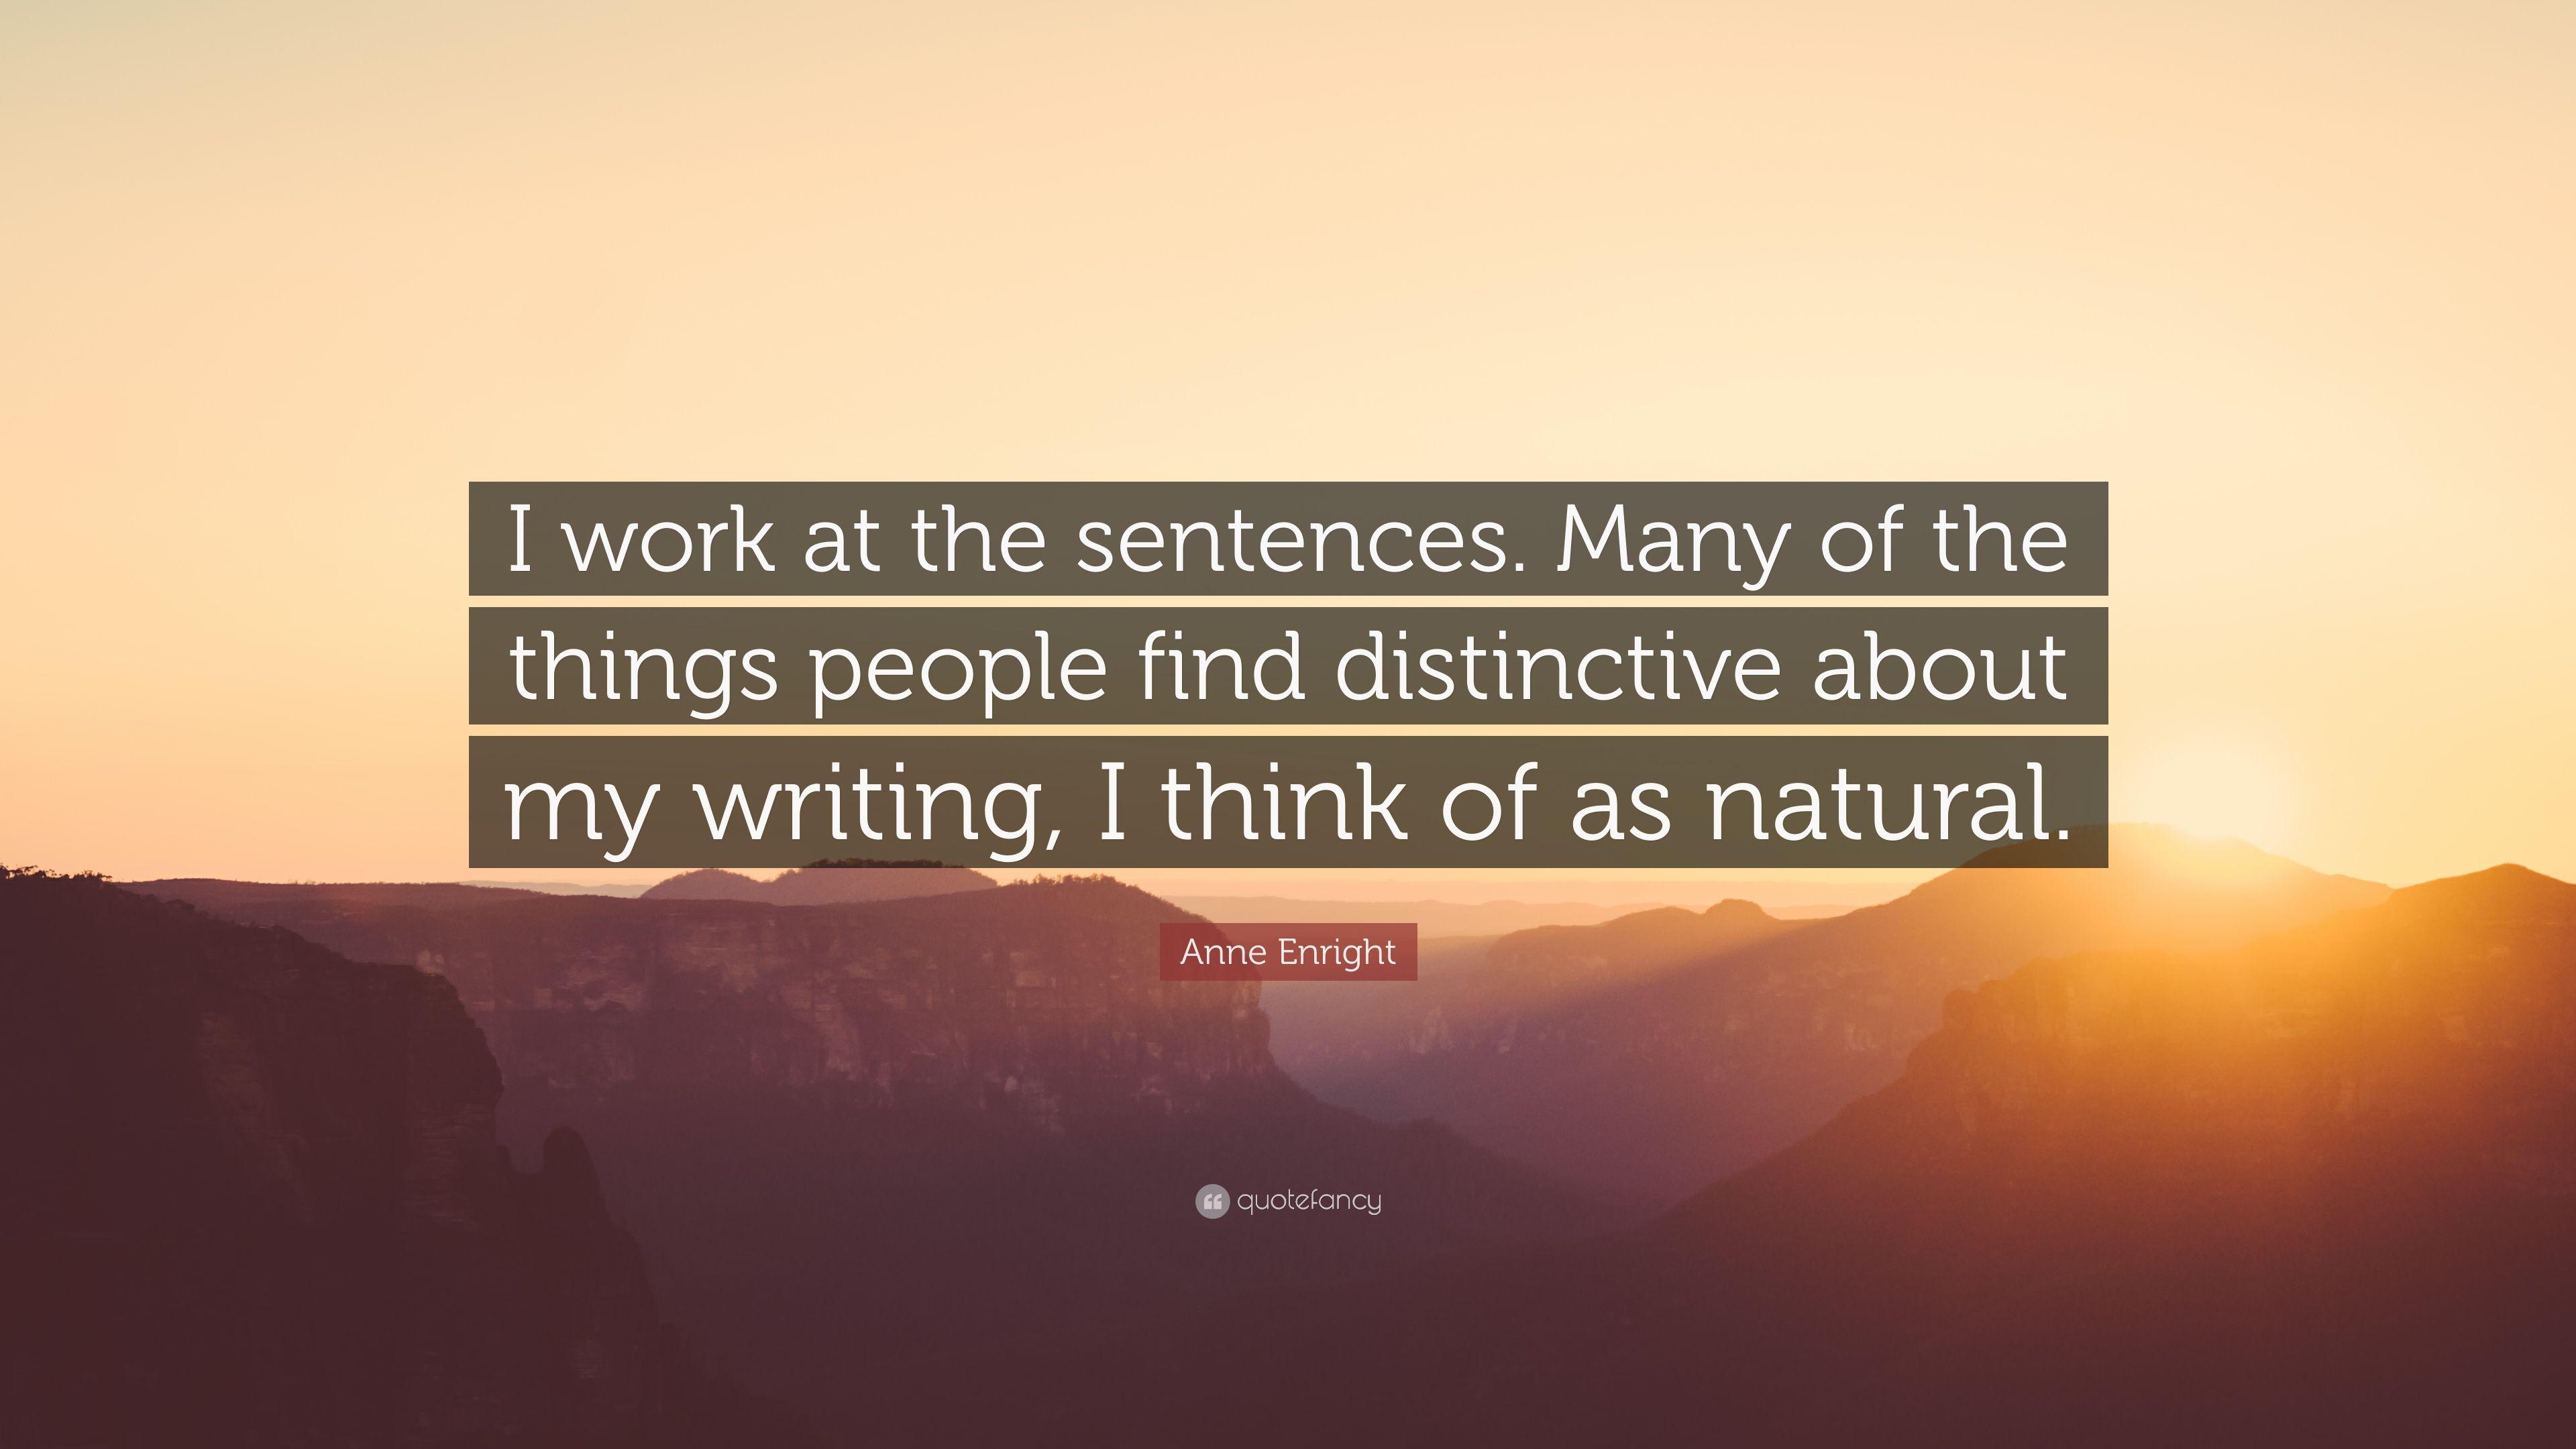 Anne Enright Quote: “I work at the sentences. Many of the things